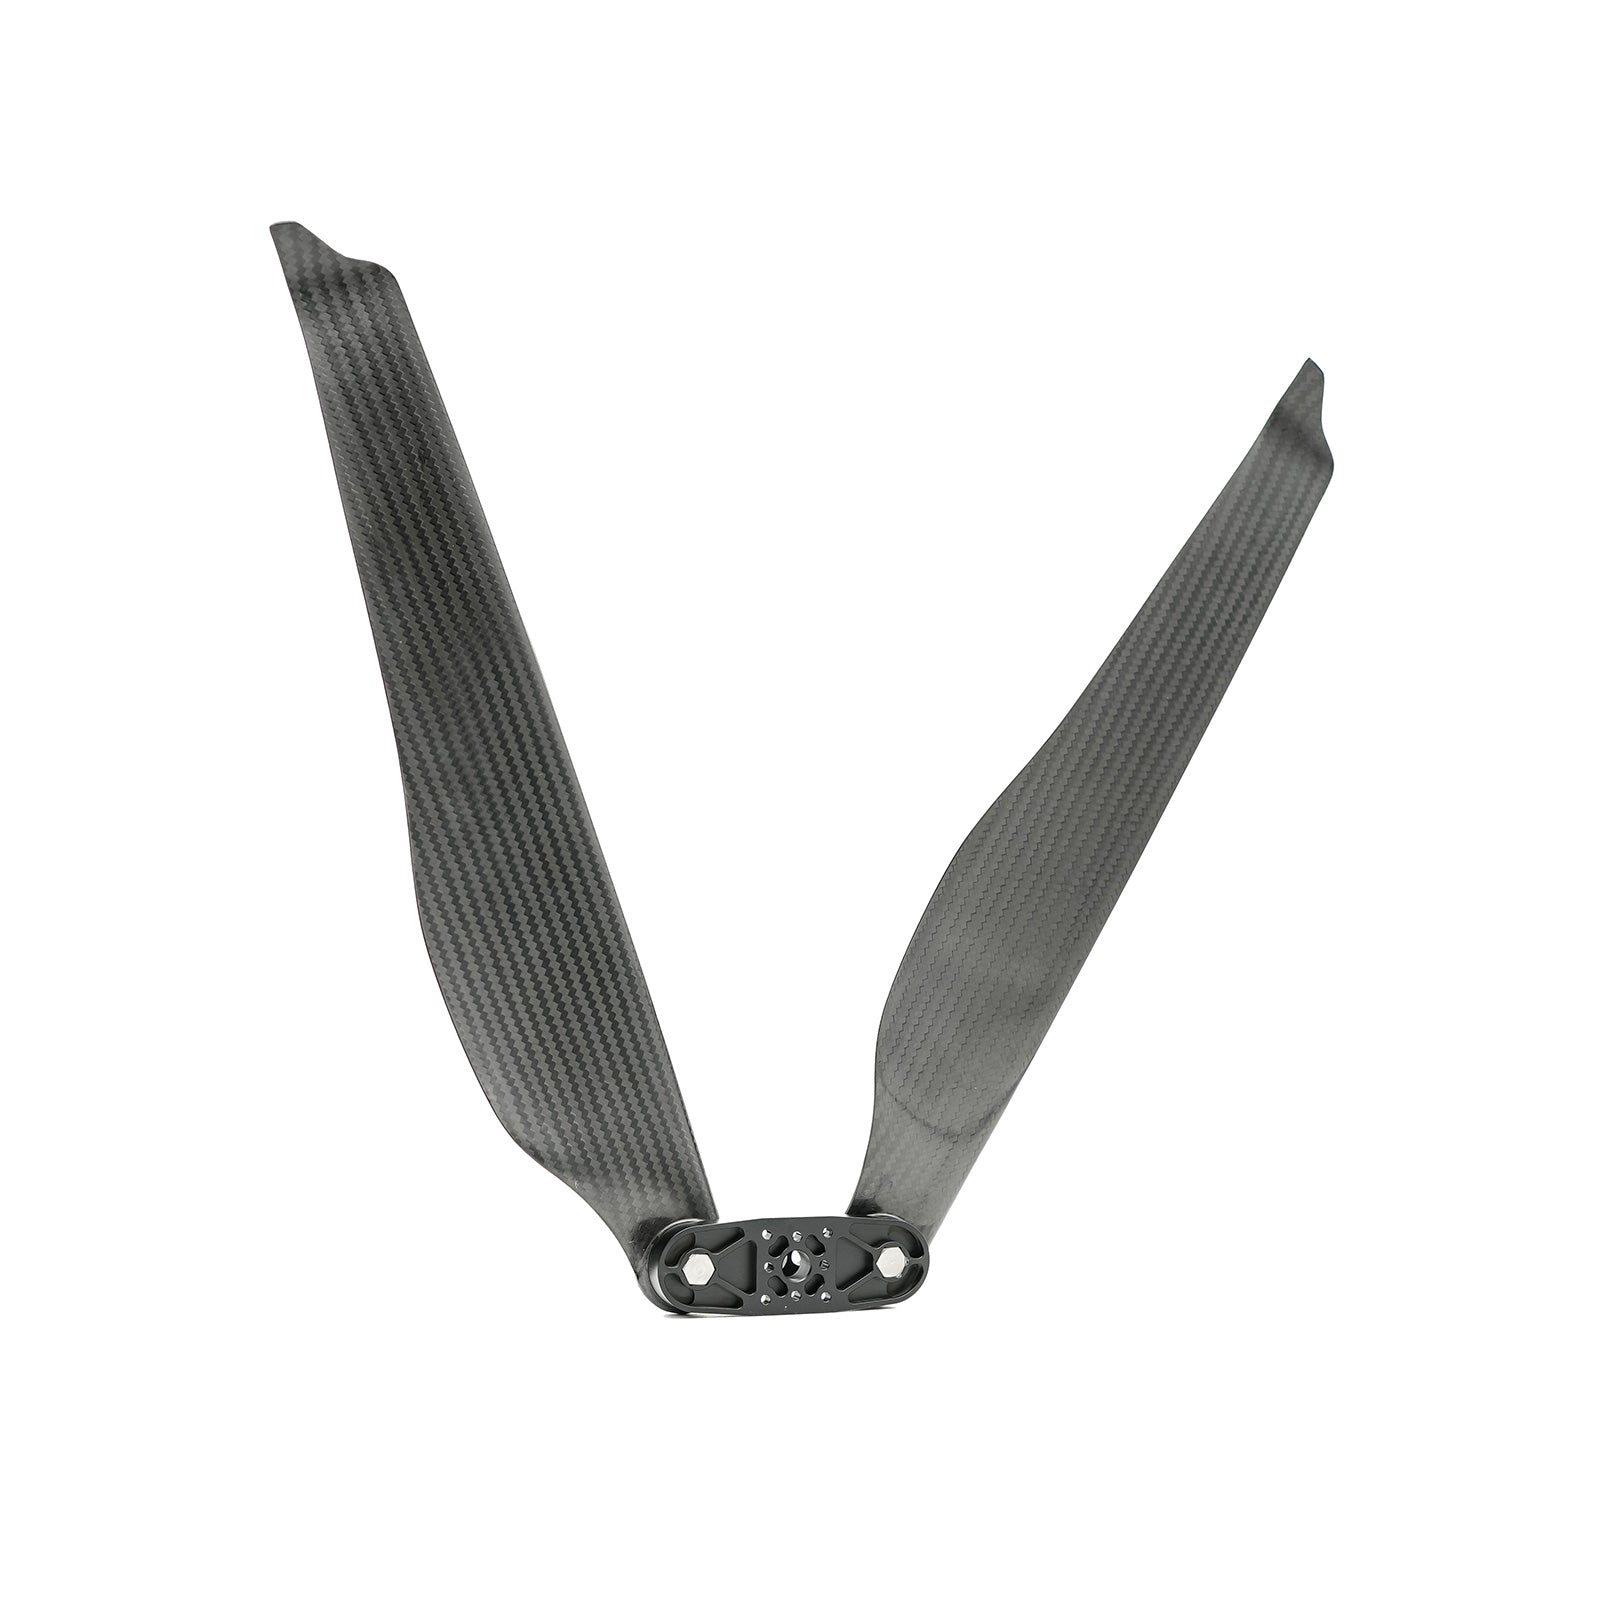 31 Inch Foldable Carbon Fiber Propeller with High Strength for Multi Rotor Drone